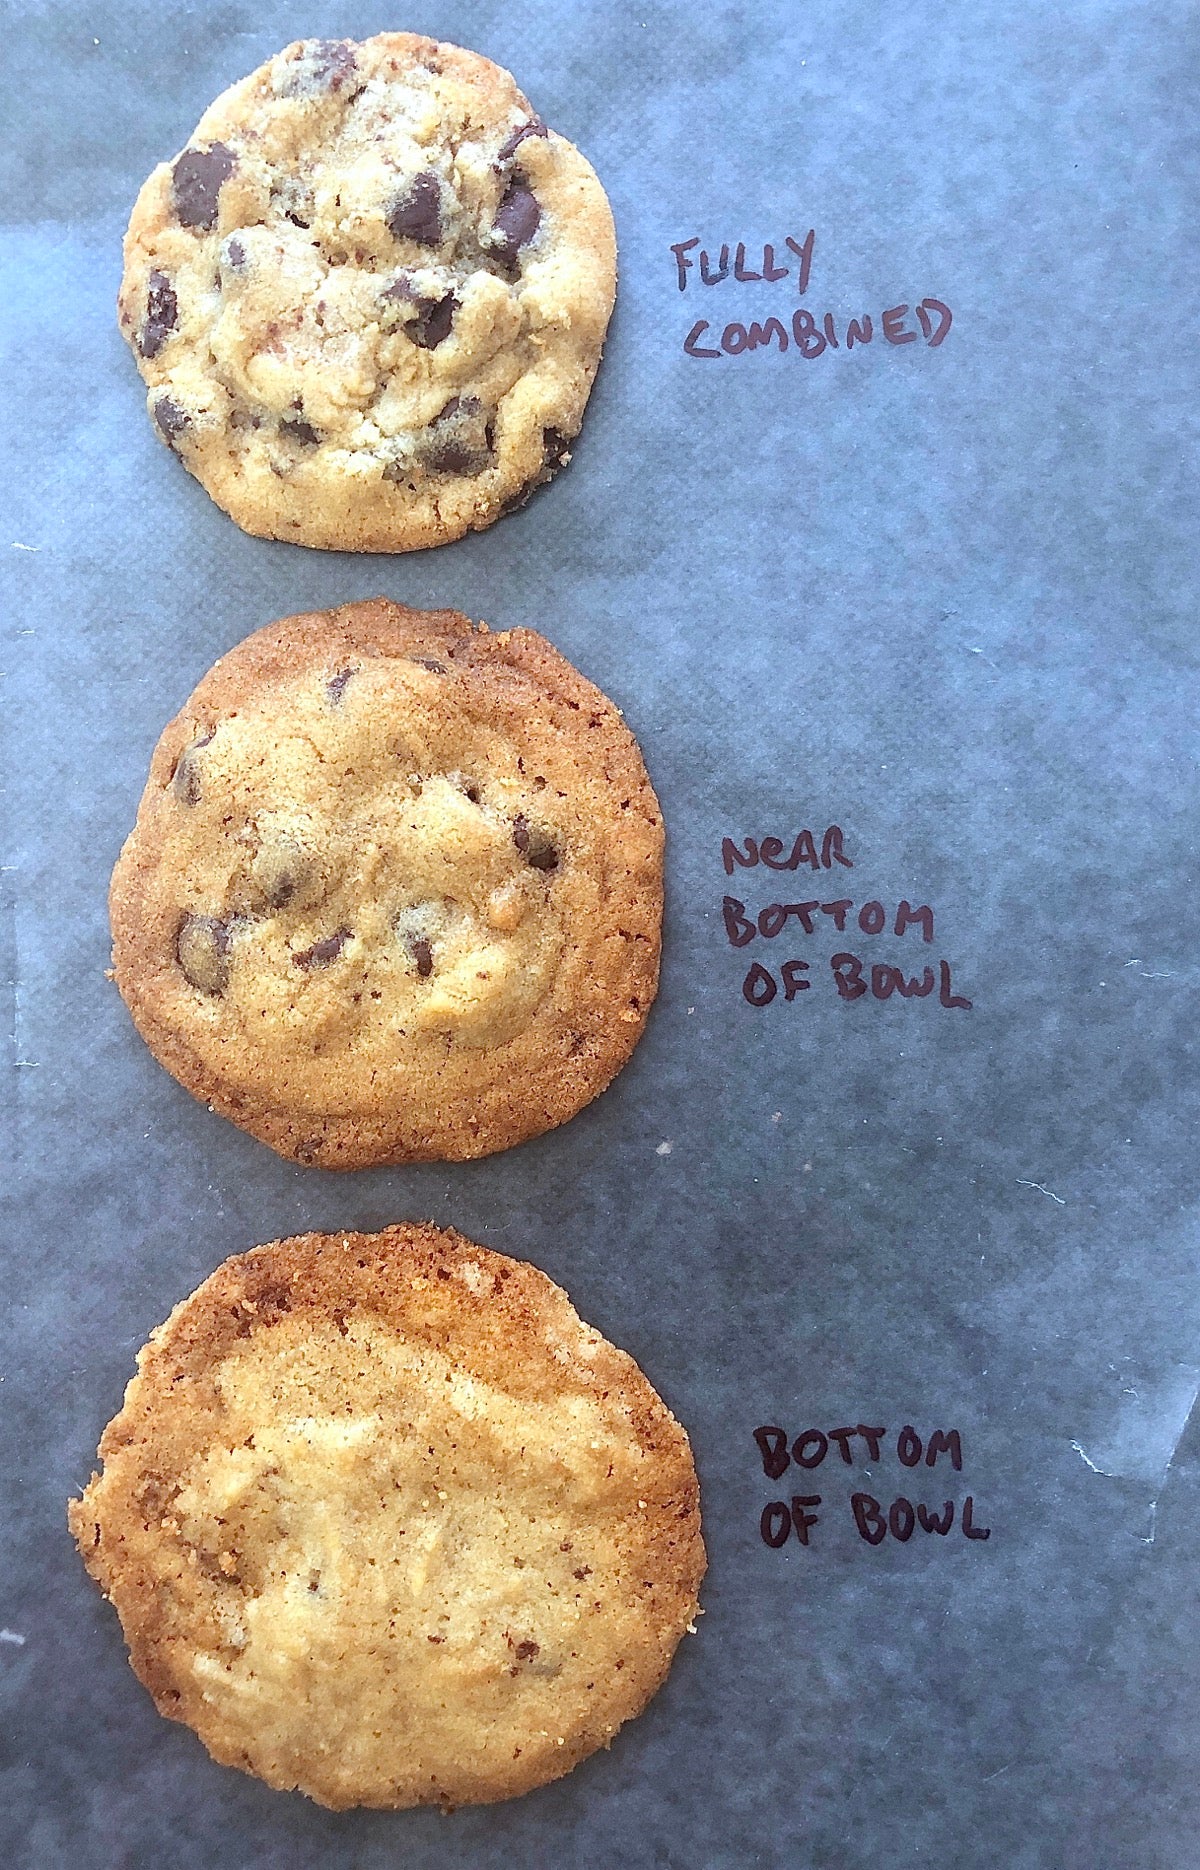 Three chocolate chip cookies: one made with thoroughly combined batter, one with partially combined, and one made from the dregs in the bottom of the mixing bowl.